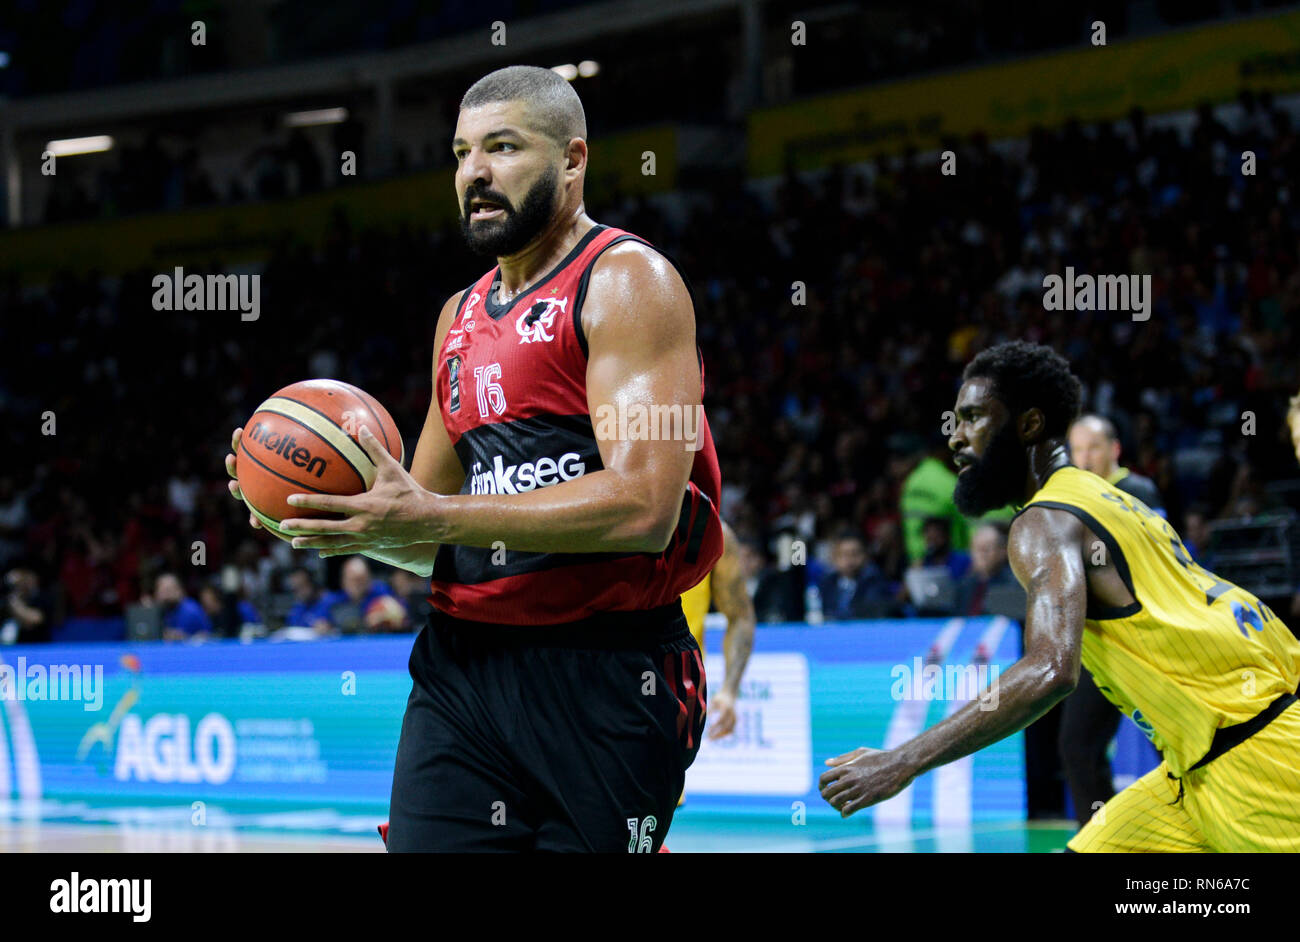 Rio De Janeiro, Brazil. 17th Feb, 2019. Carlos Olivinha during AEK x  Flamengo for the 1st Place contest in the Intercontinental Basketball Cup  held at the Carioca Arena 1 in Rio de